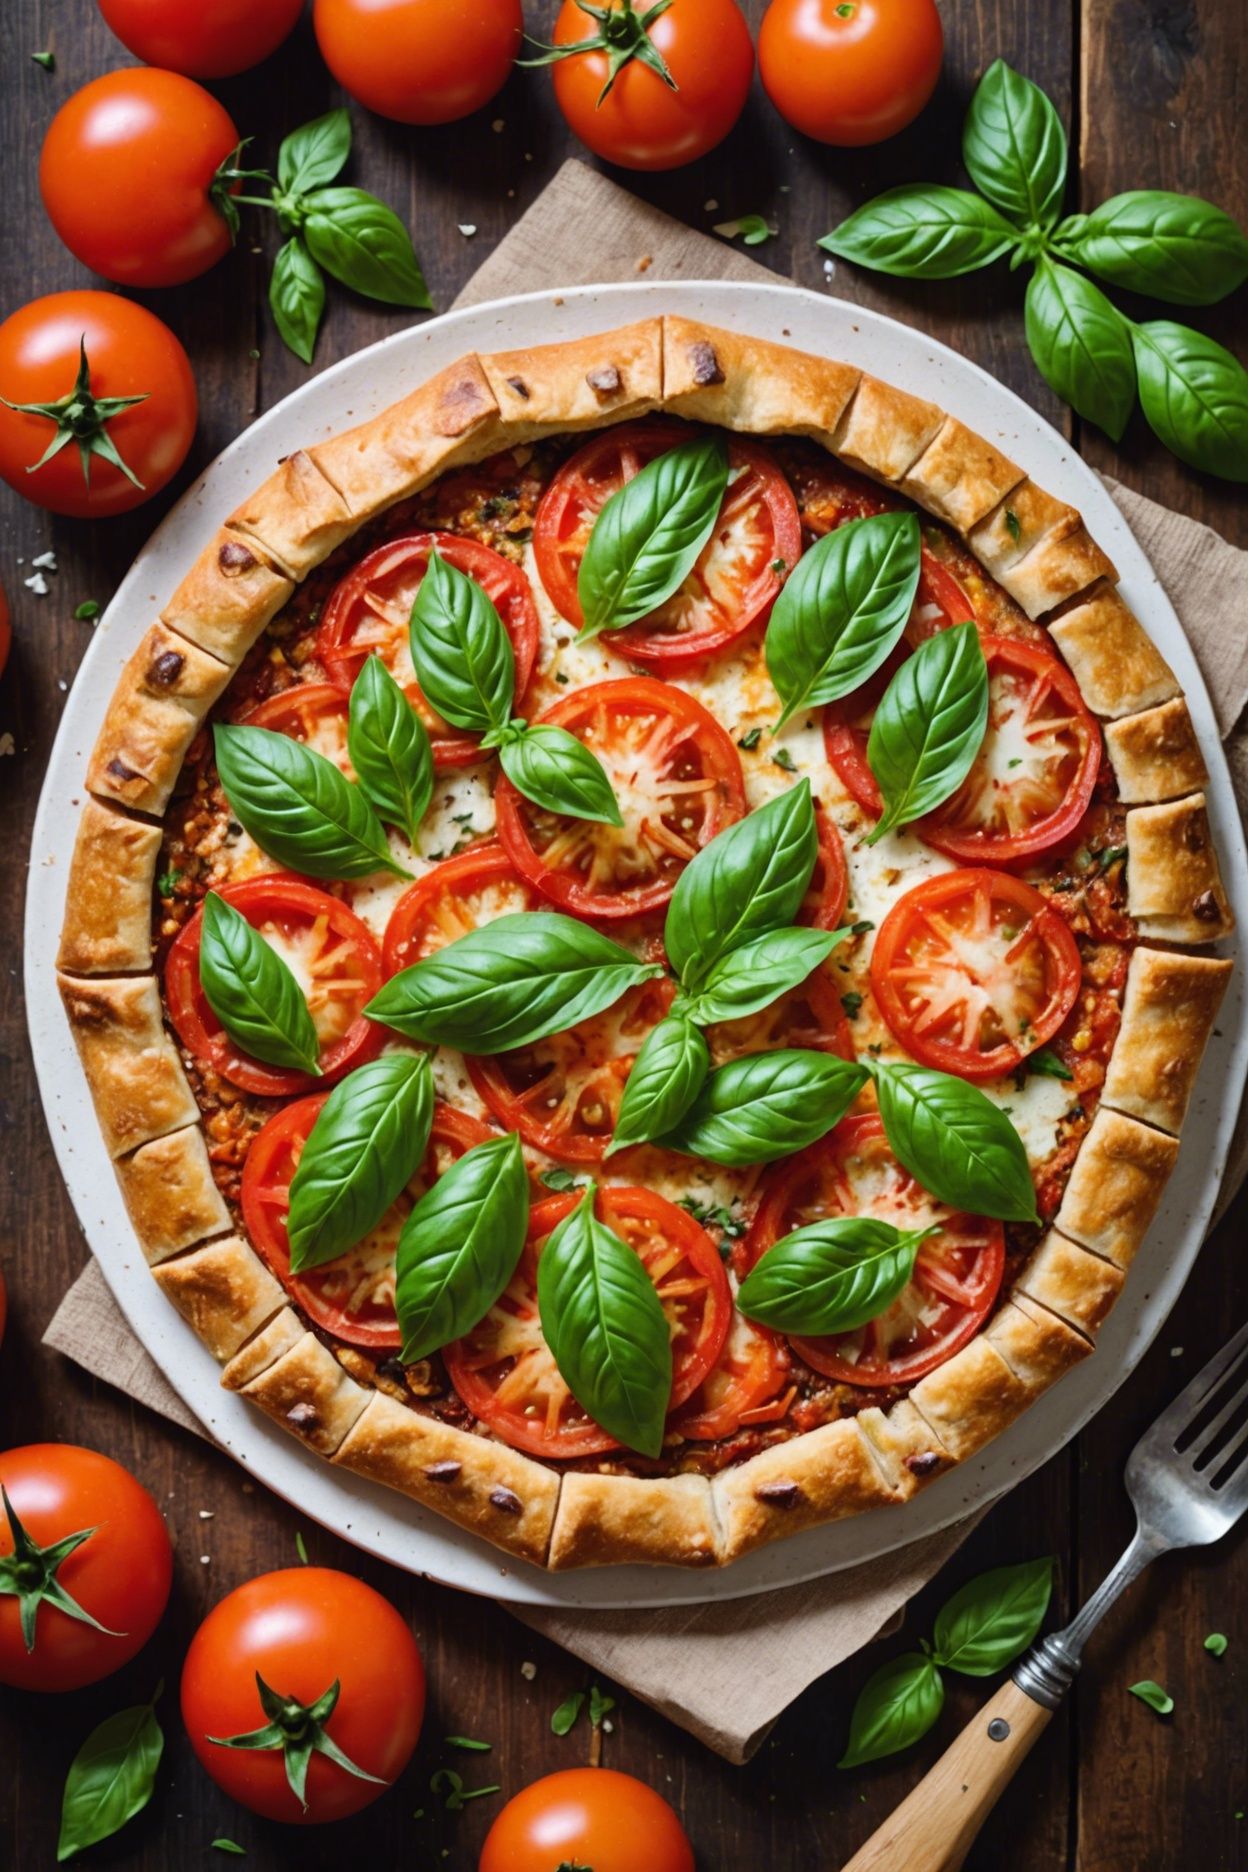 Tomato Galette With Parmesan Whole Wheat Crust